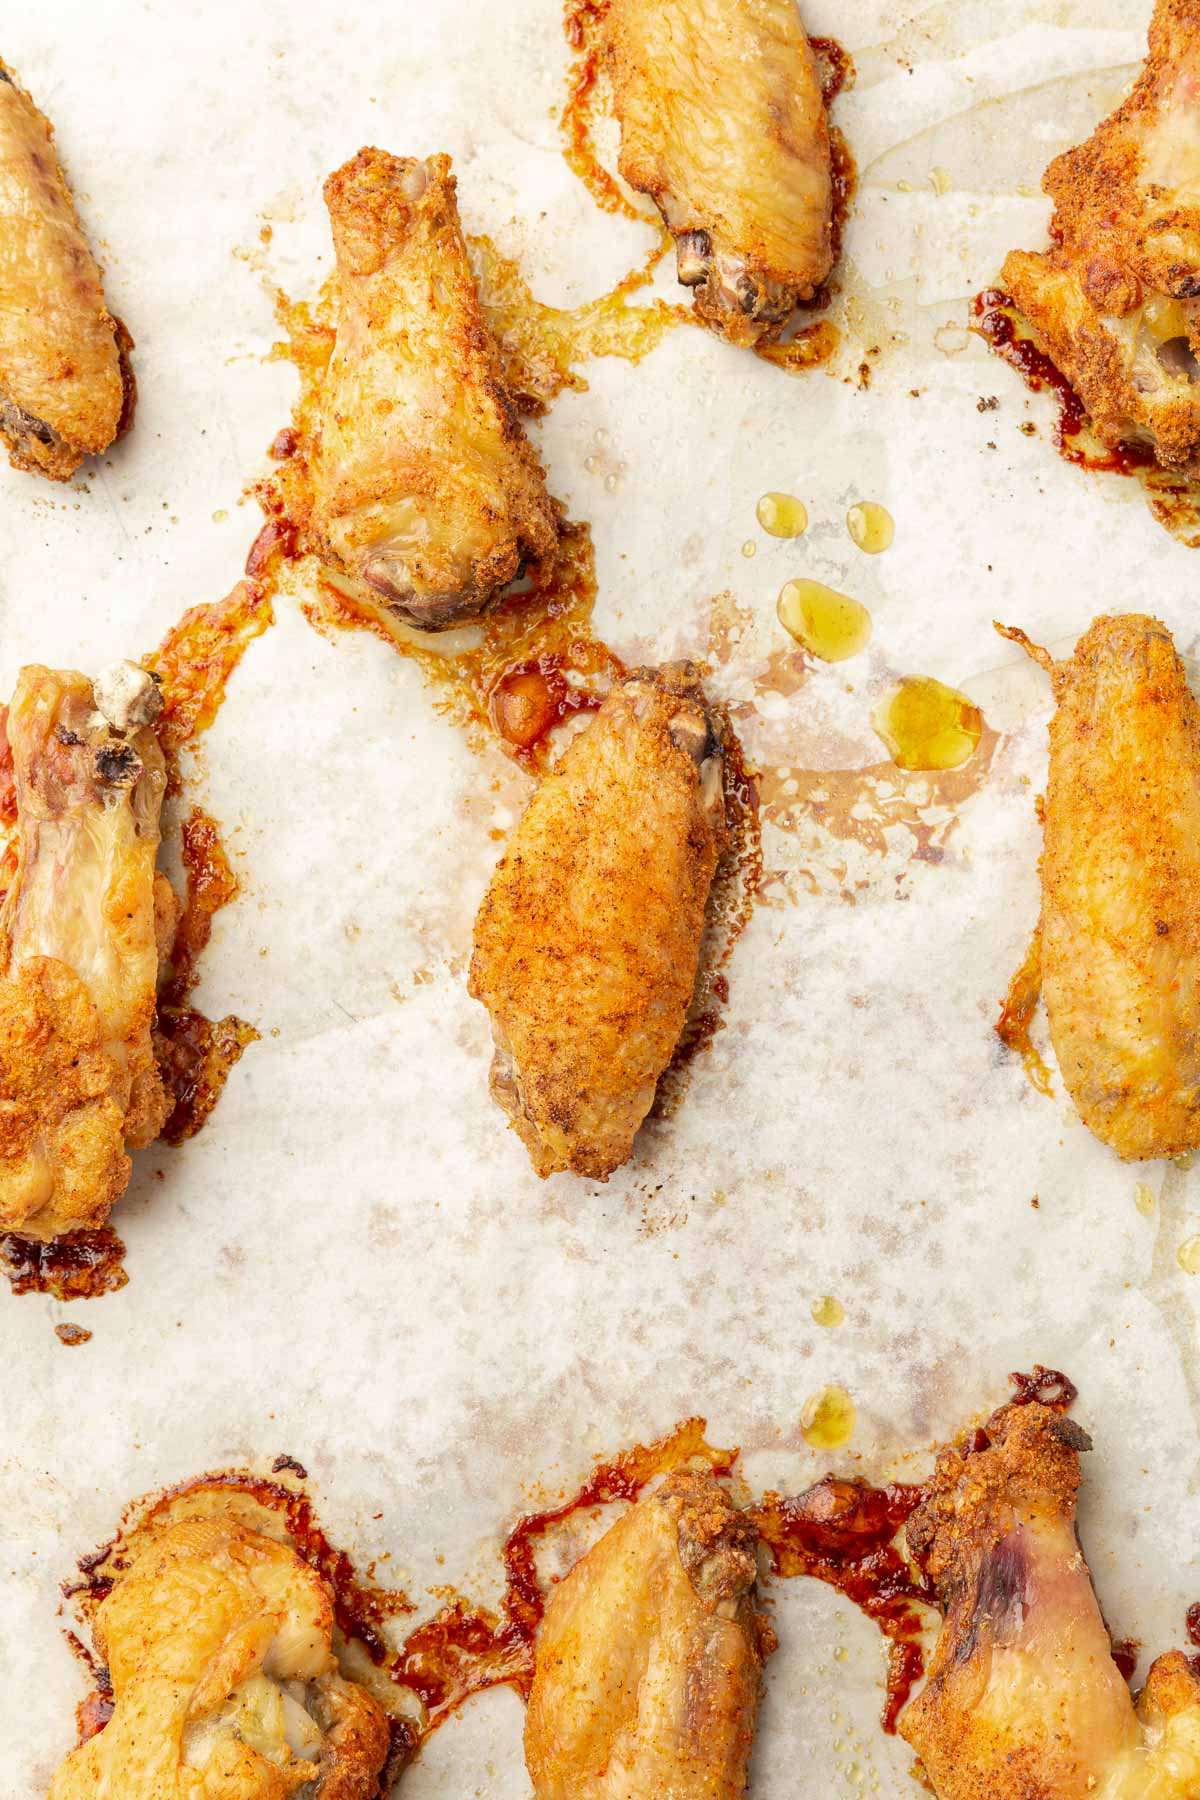 Baked chicken wings on a baking sheet lined with parchment paper.